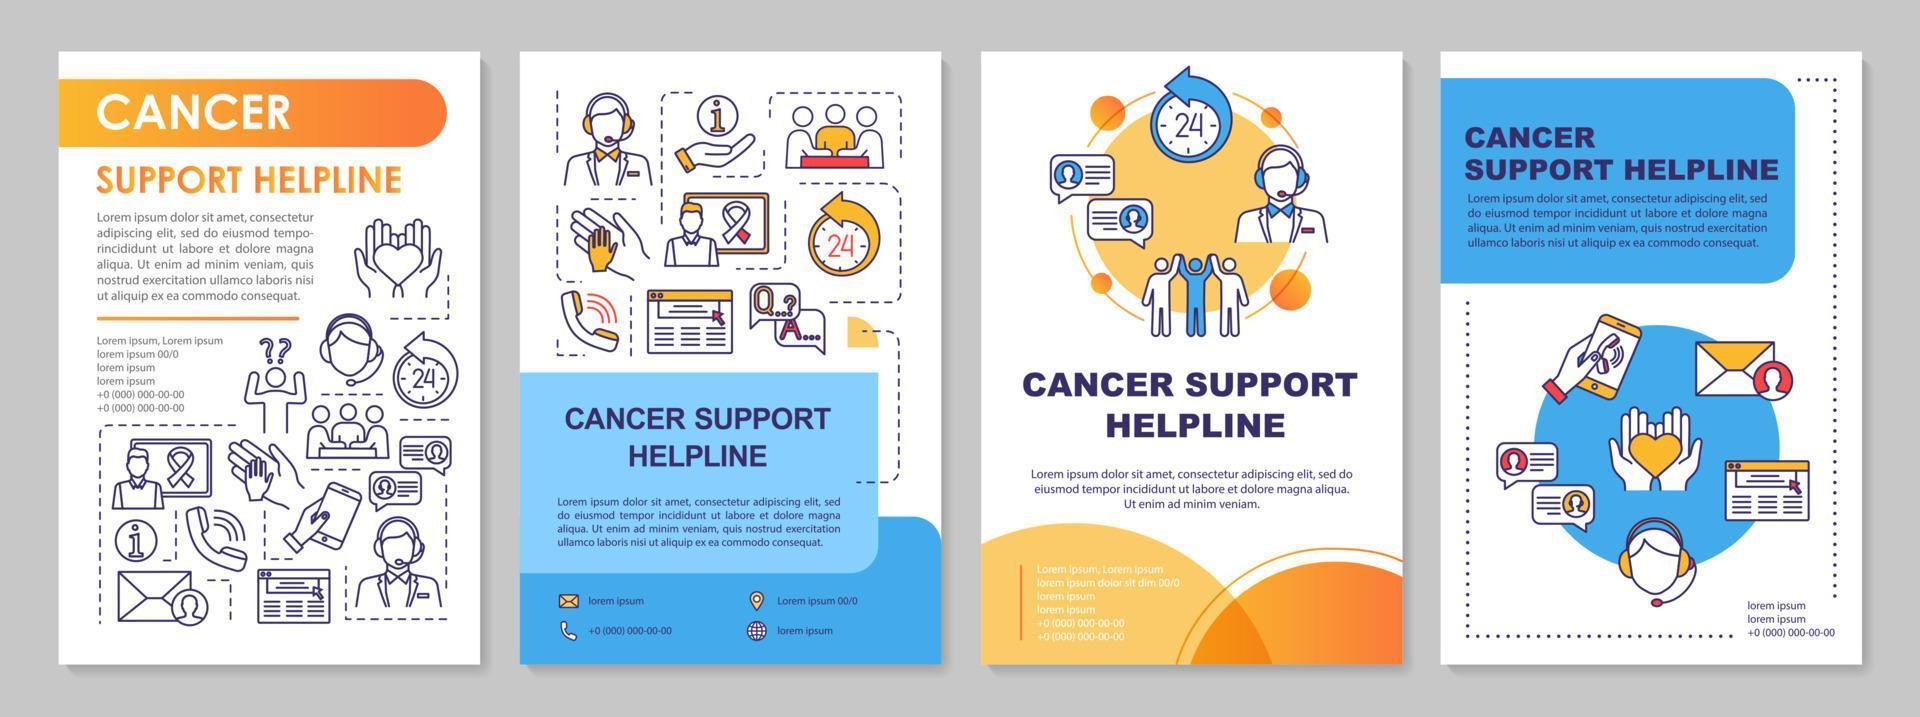 Cancer Support Helpline brochure template. Call center. Flyer, booklet, leaflet print, cover design with linear icons. Oncology help. Vector layouts for magazines, annual reports, advertising posters